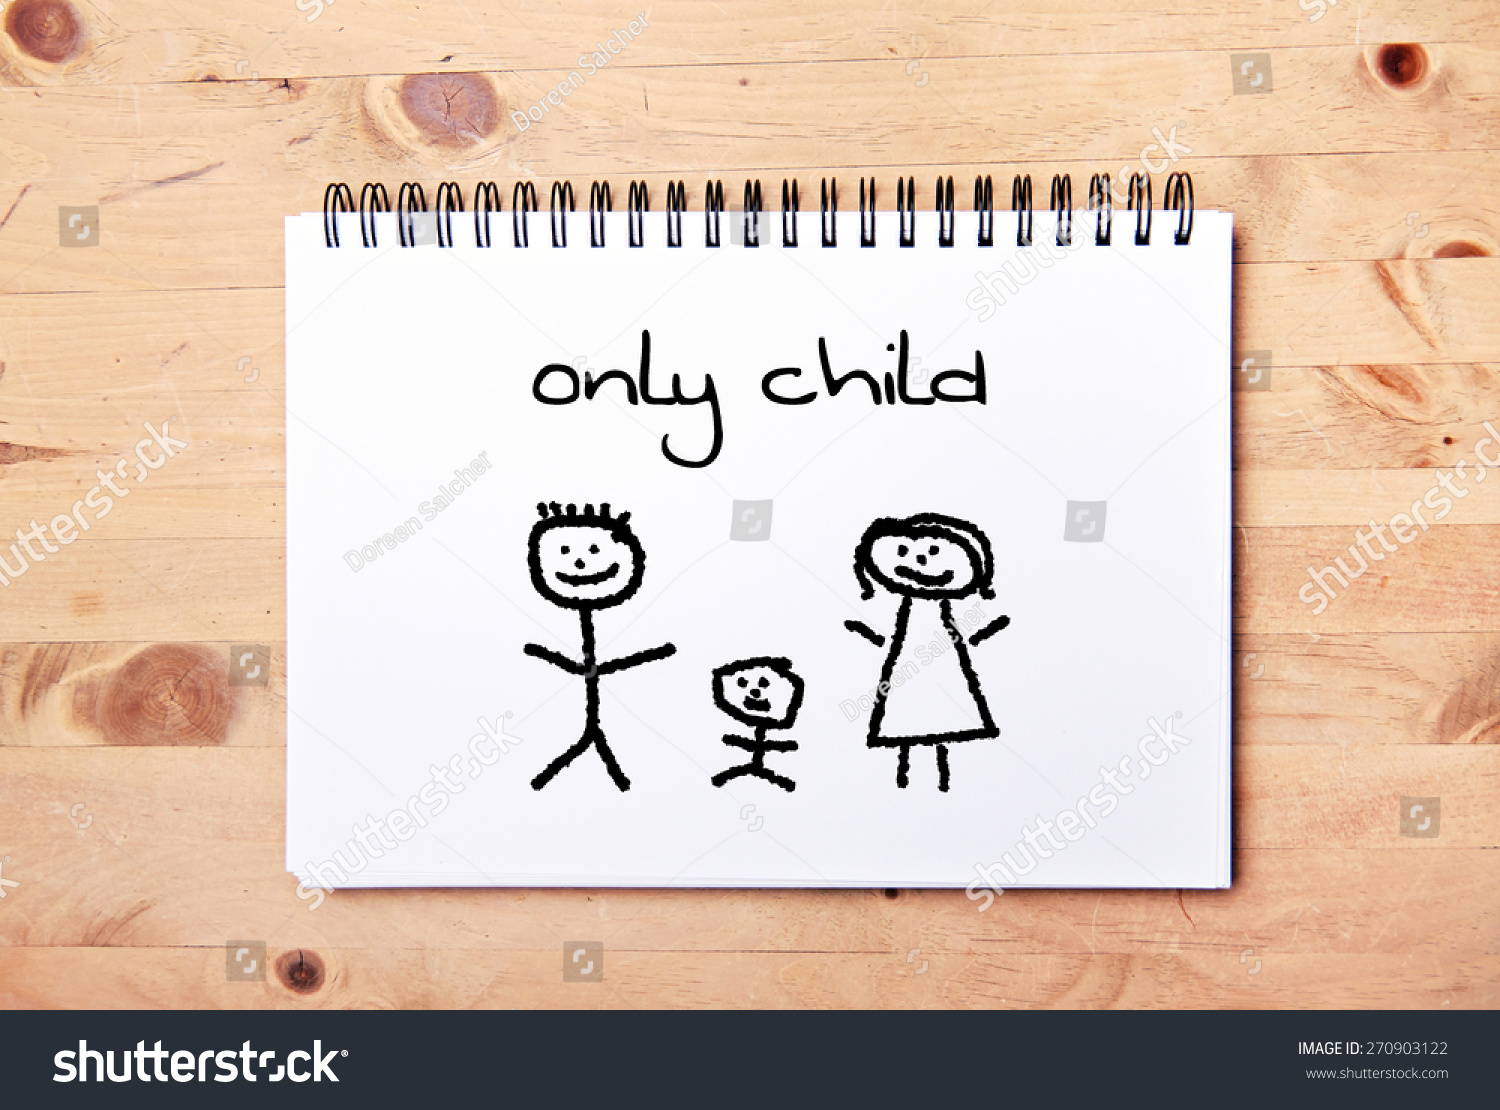 stick man background - drawing block - only child #270903122